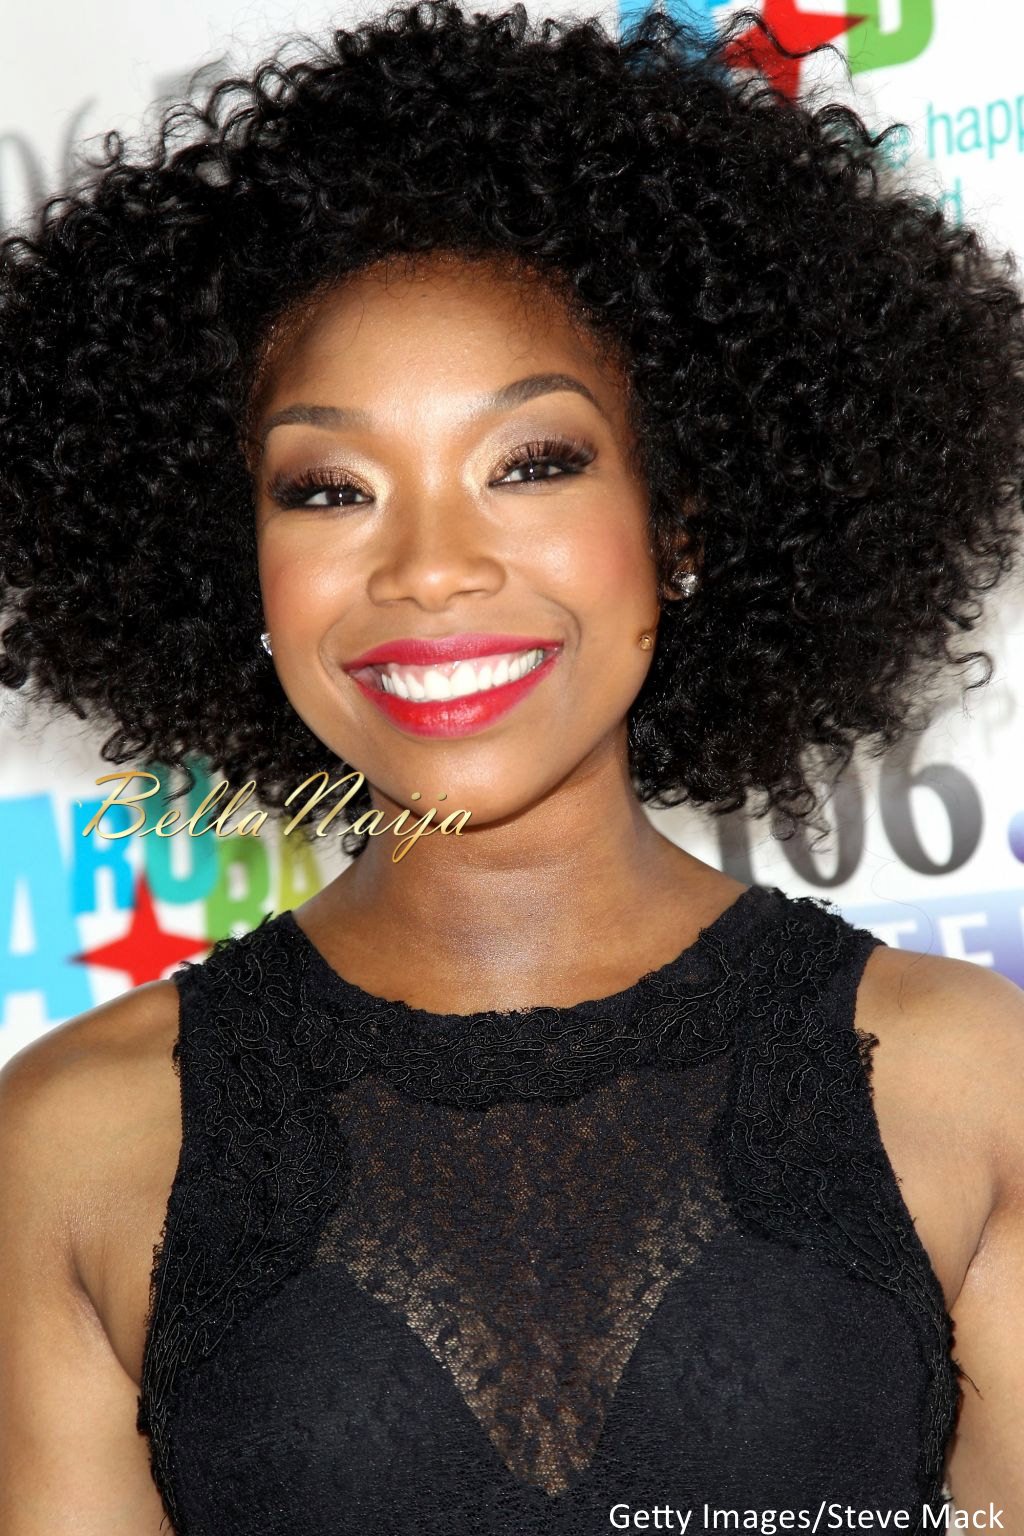 Her Natural Hair, Loving Being a Black Woman & More! Brandy Norwood Shares  with Essence.com | BellaNaija